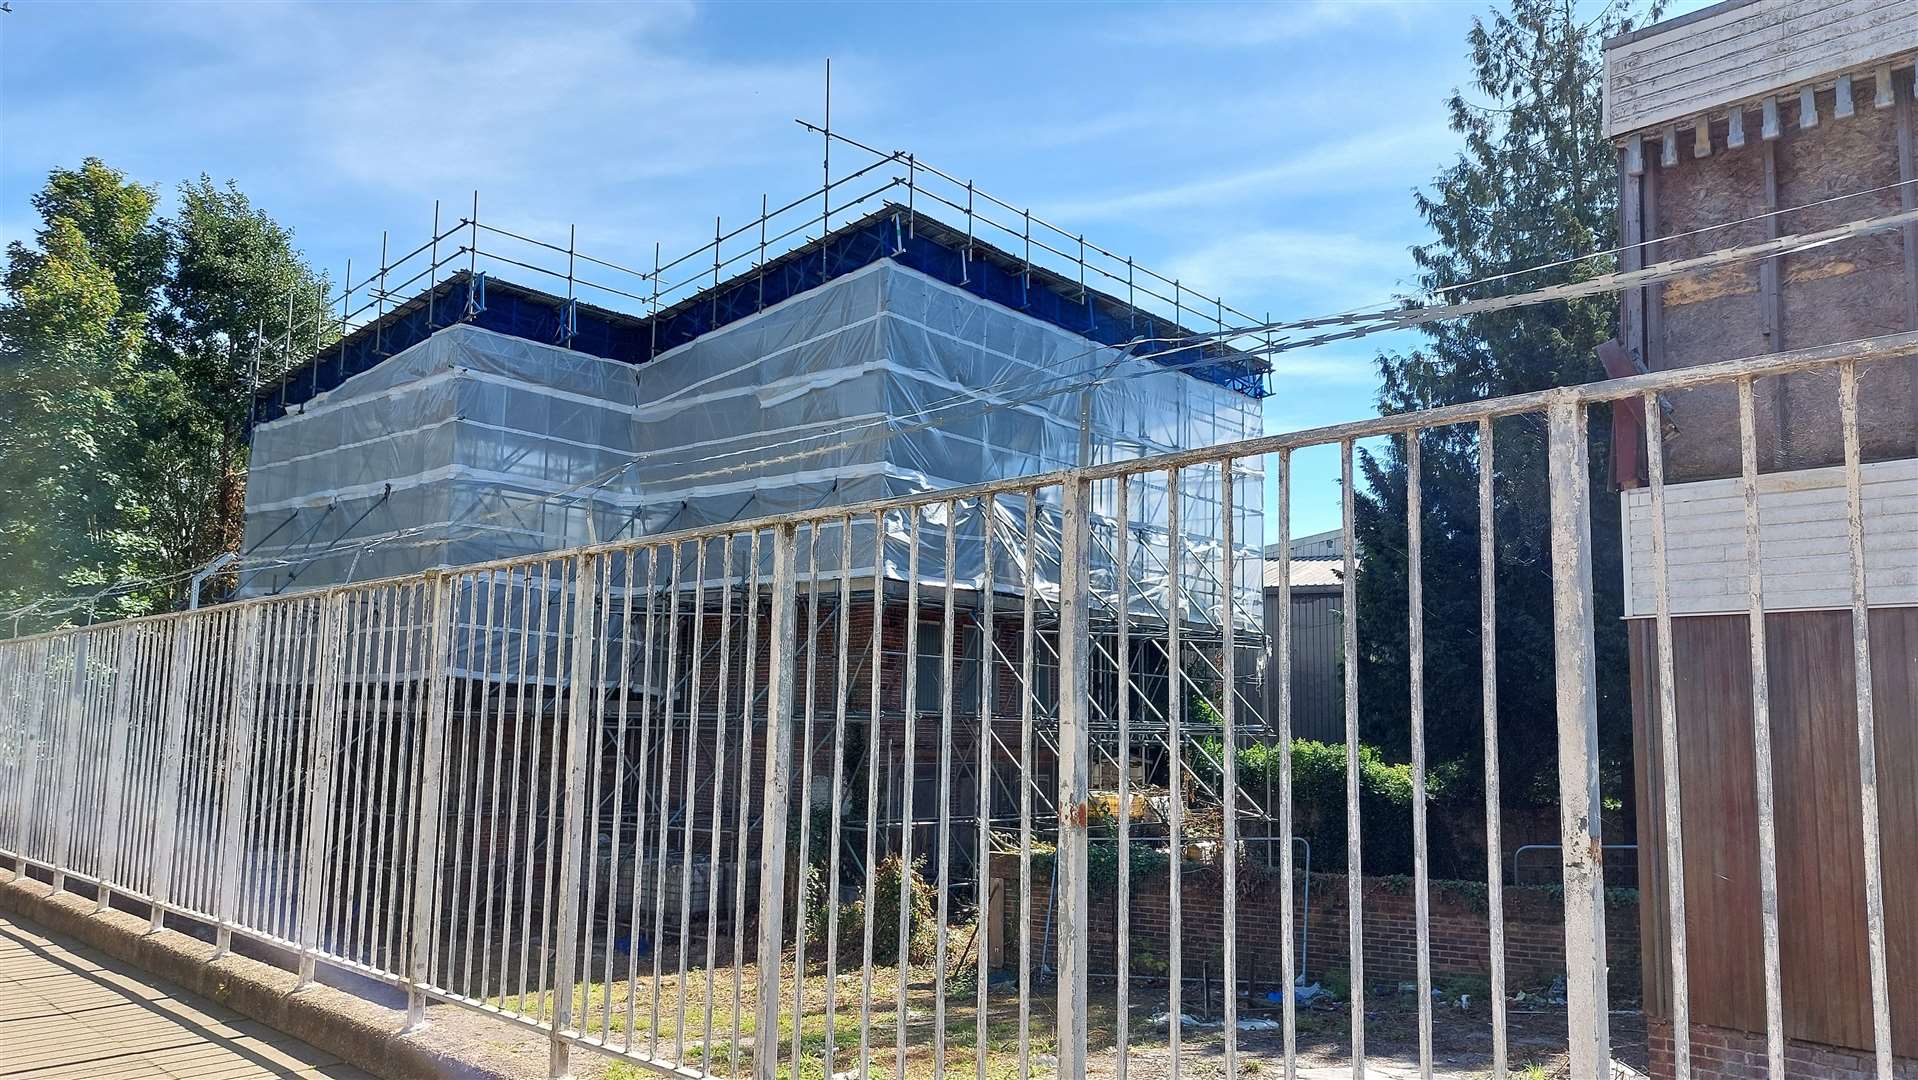 The Grade II*-listed Whist House is currently surrounded by scaffolding